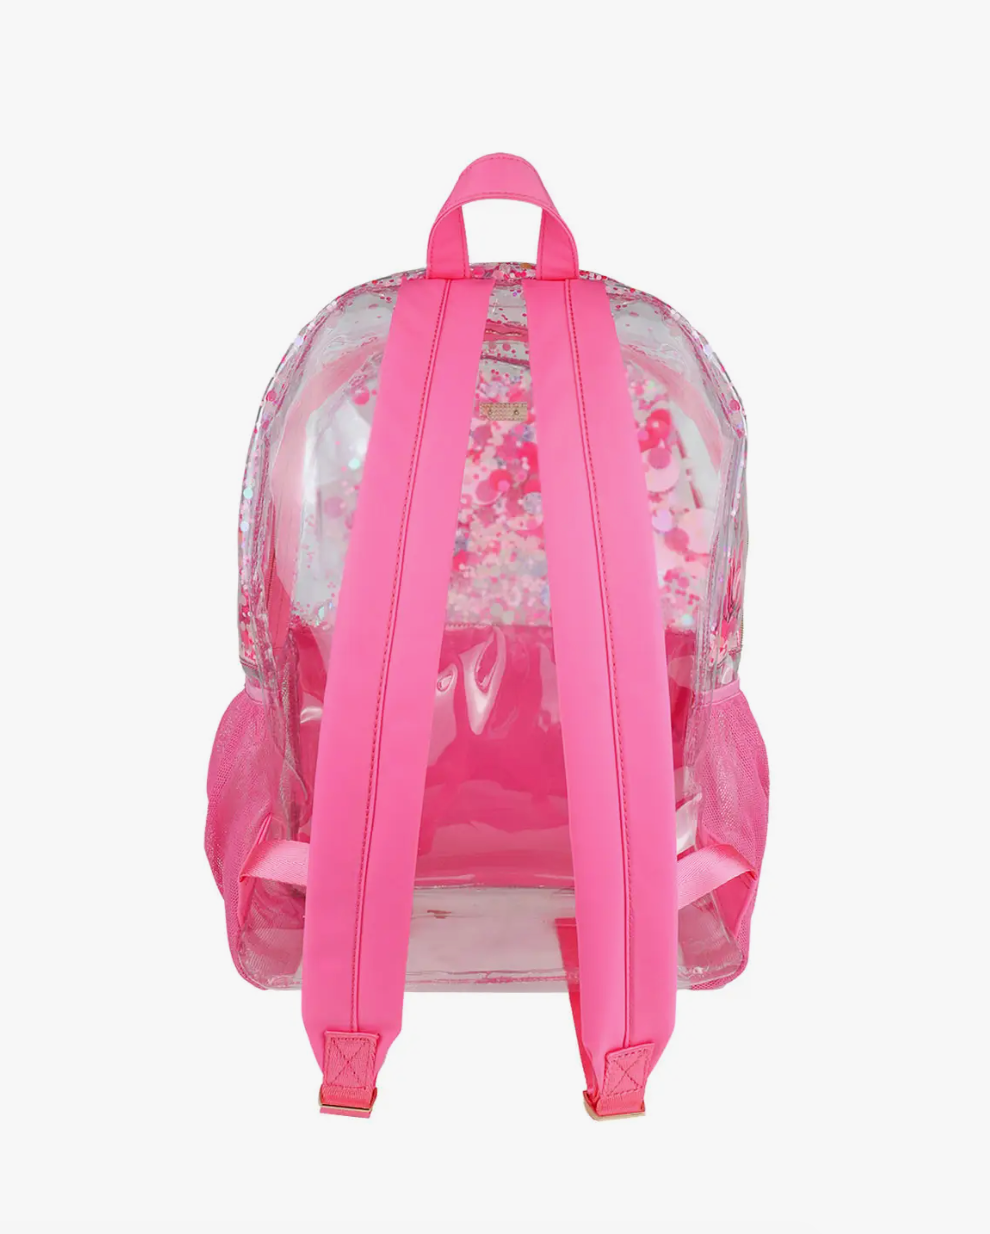 Pink Party Confetti Pink Clear Backpack